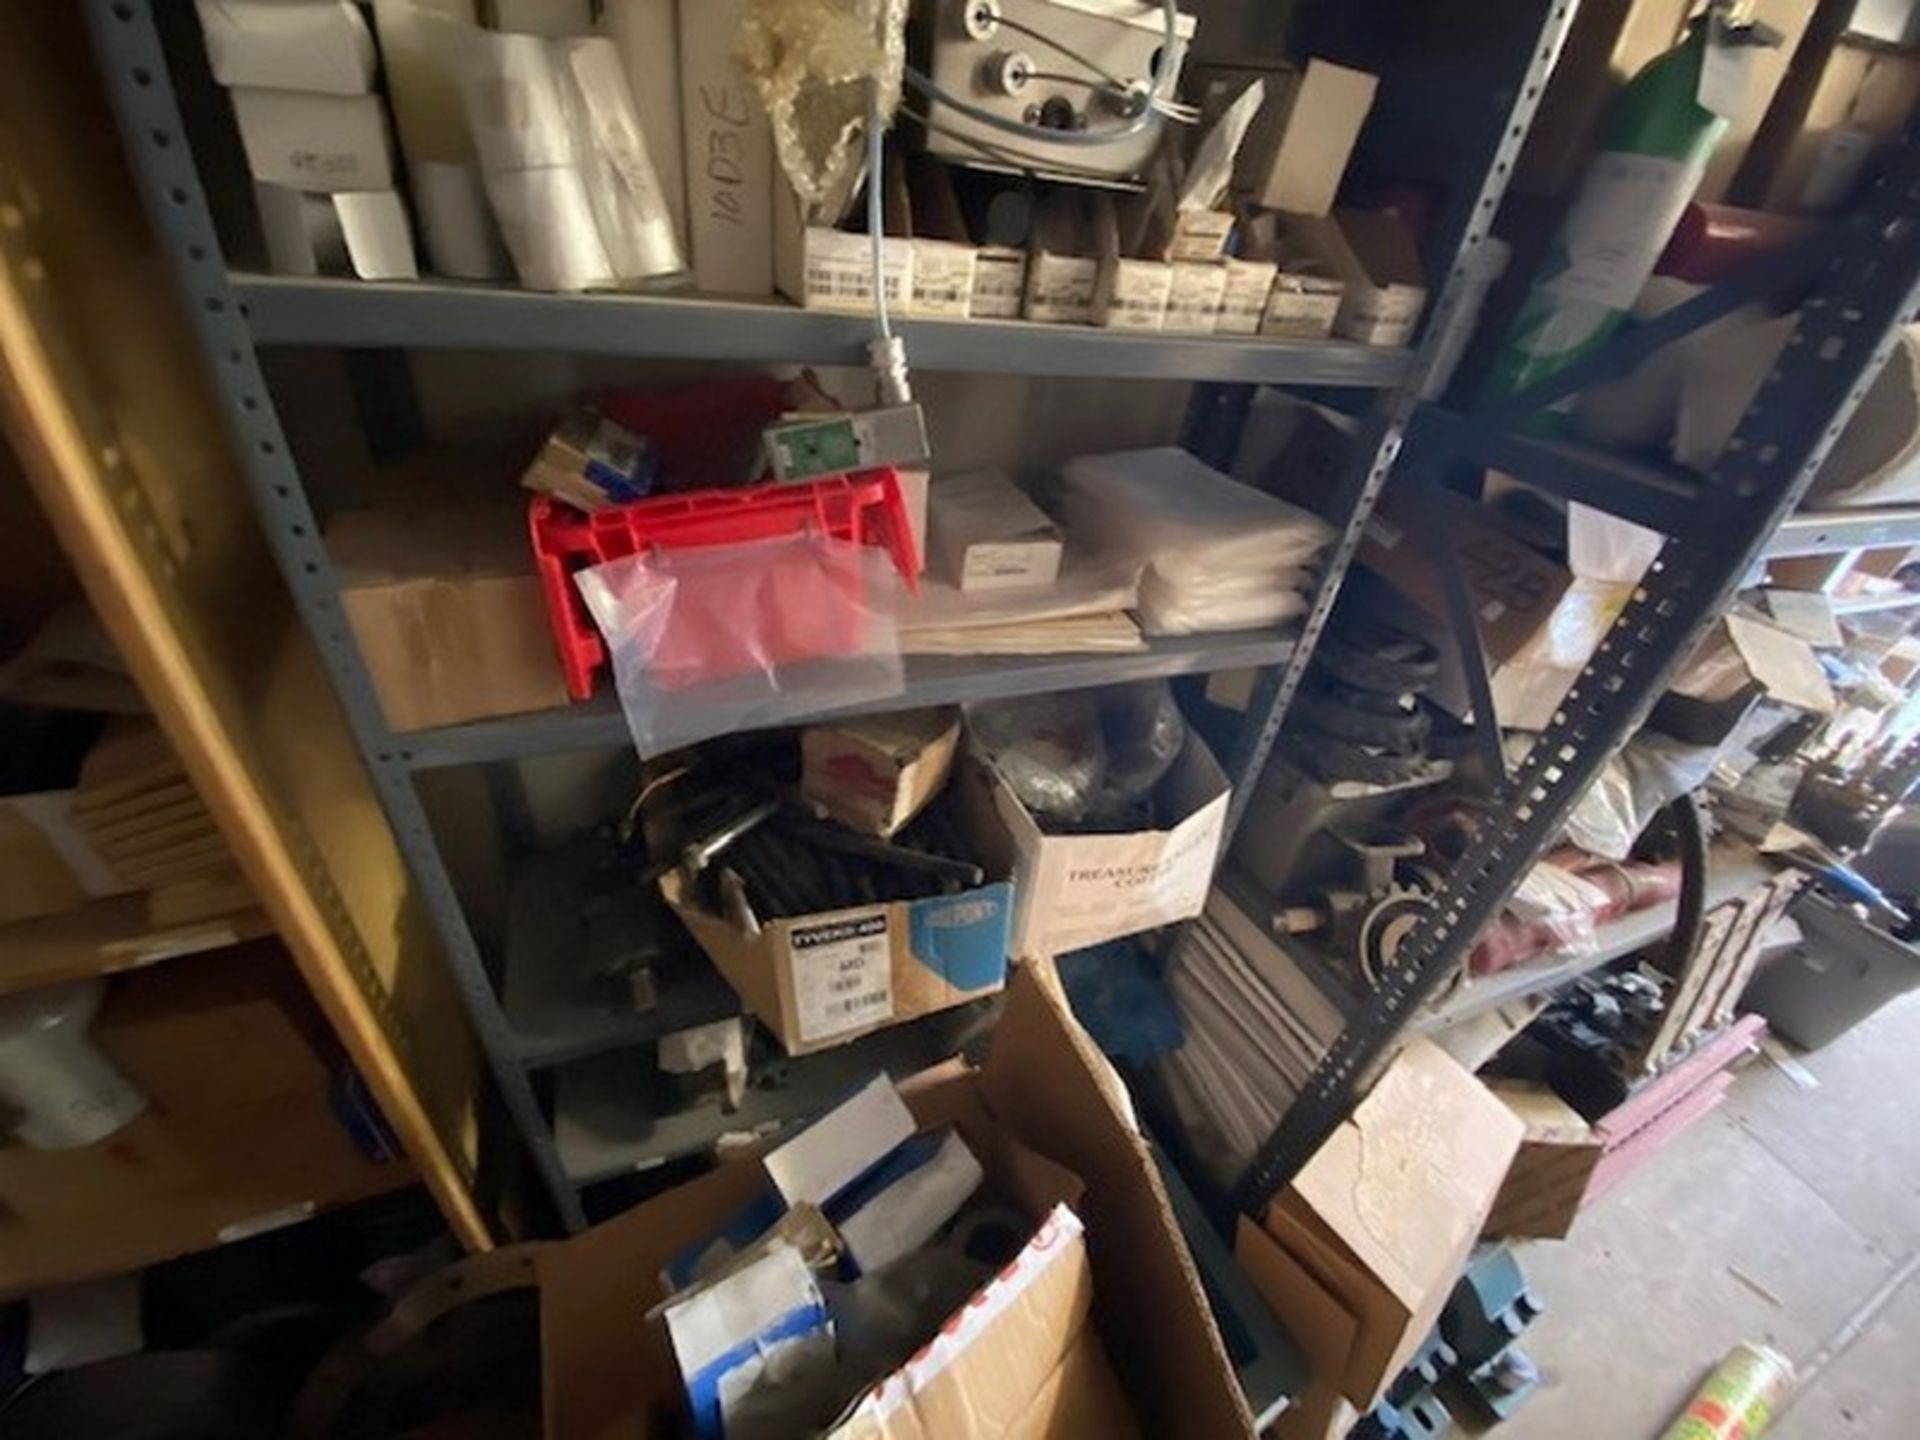 Assorted Spare Parts on 4-Shelving Units, Includes Sprockets, Gauges, Valves, Bearings, Motors, - Image 17 of 17